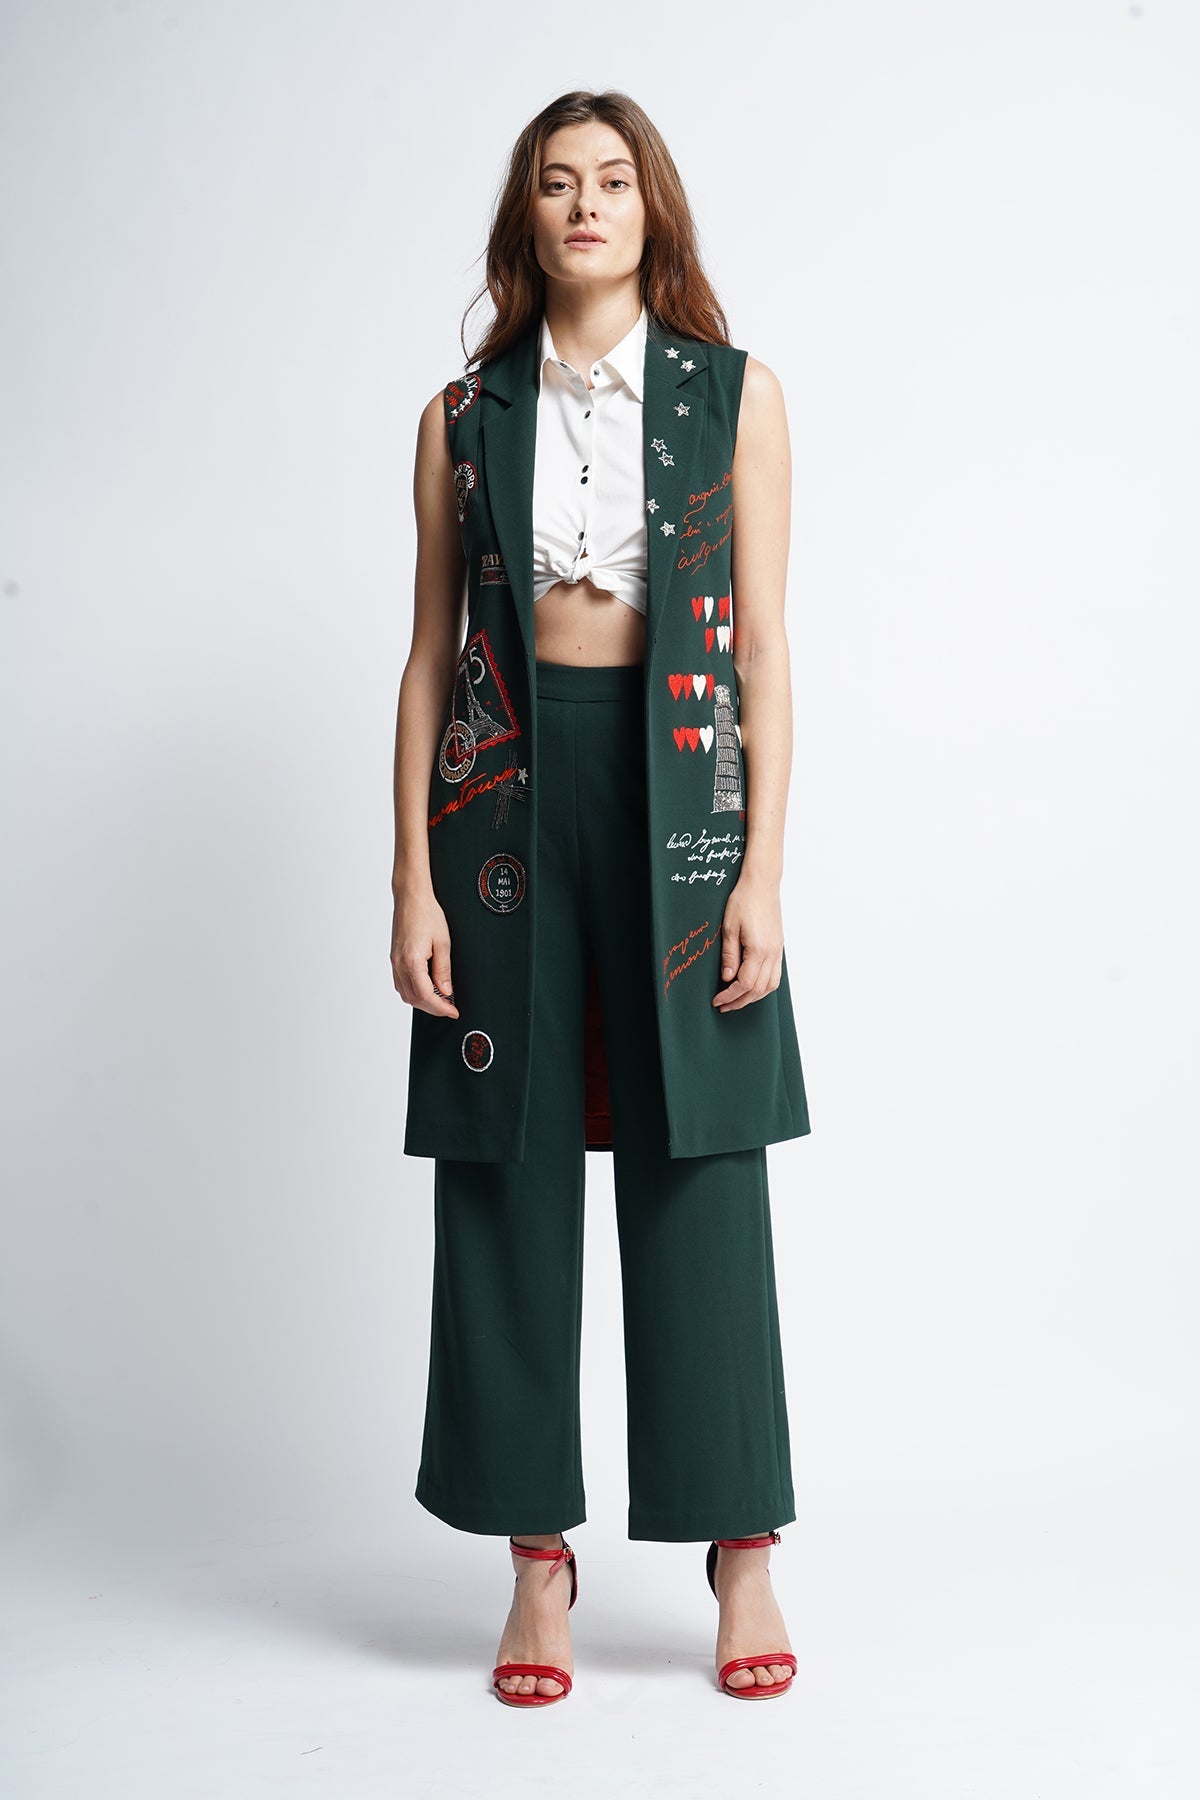 Bottle Green Relaxed Pants